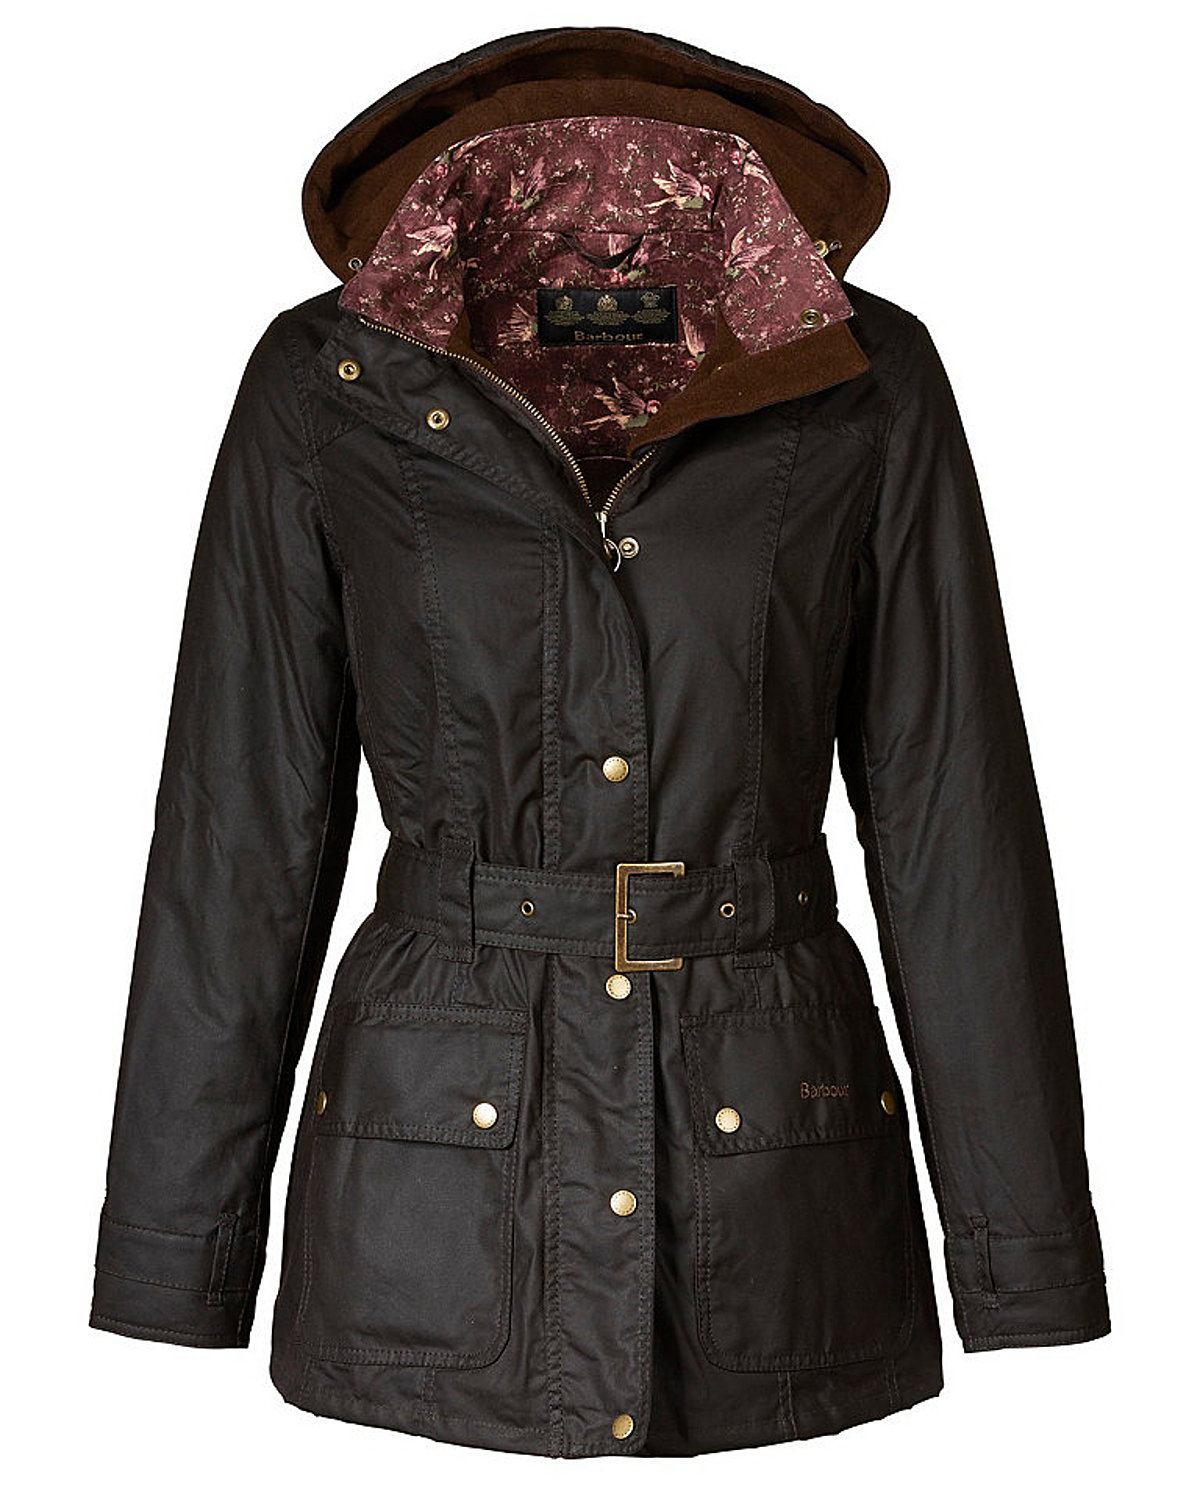 Barbour Bower Belted rustic - Damenwachsjacke